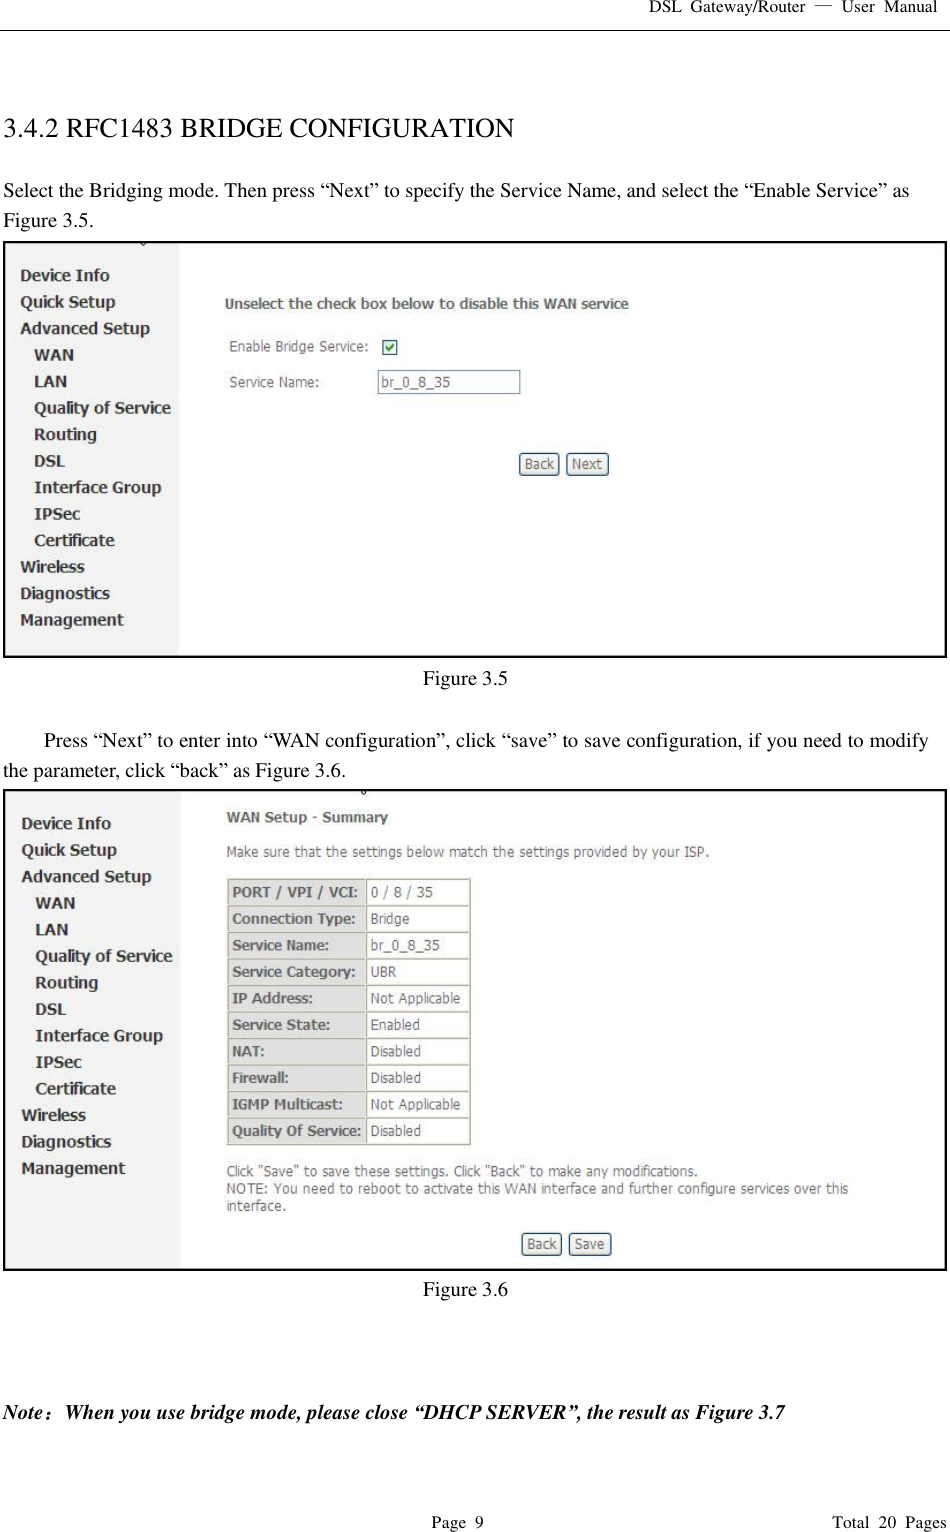 DSL Gateway/Router  — User Manual  Page 9                                       Total 20 Pages   3.4.2 RFC1483 BRIDGE CONFIGURATION  Select the Bridging mode. Then press “Next” to specify the Service Name, and select the “Enable Service” as Figure 3.5.  Figure 3.5  Press “Next” to enter into “WAN configuration”, click “save” to save configuration, if you need to modify the parameter, click “back” as Figure 3.6.   Figure 3.6    Note：When you use bridge mode, please close “DHCP SERVER”, the result as Figure 3.7  